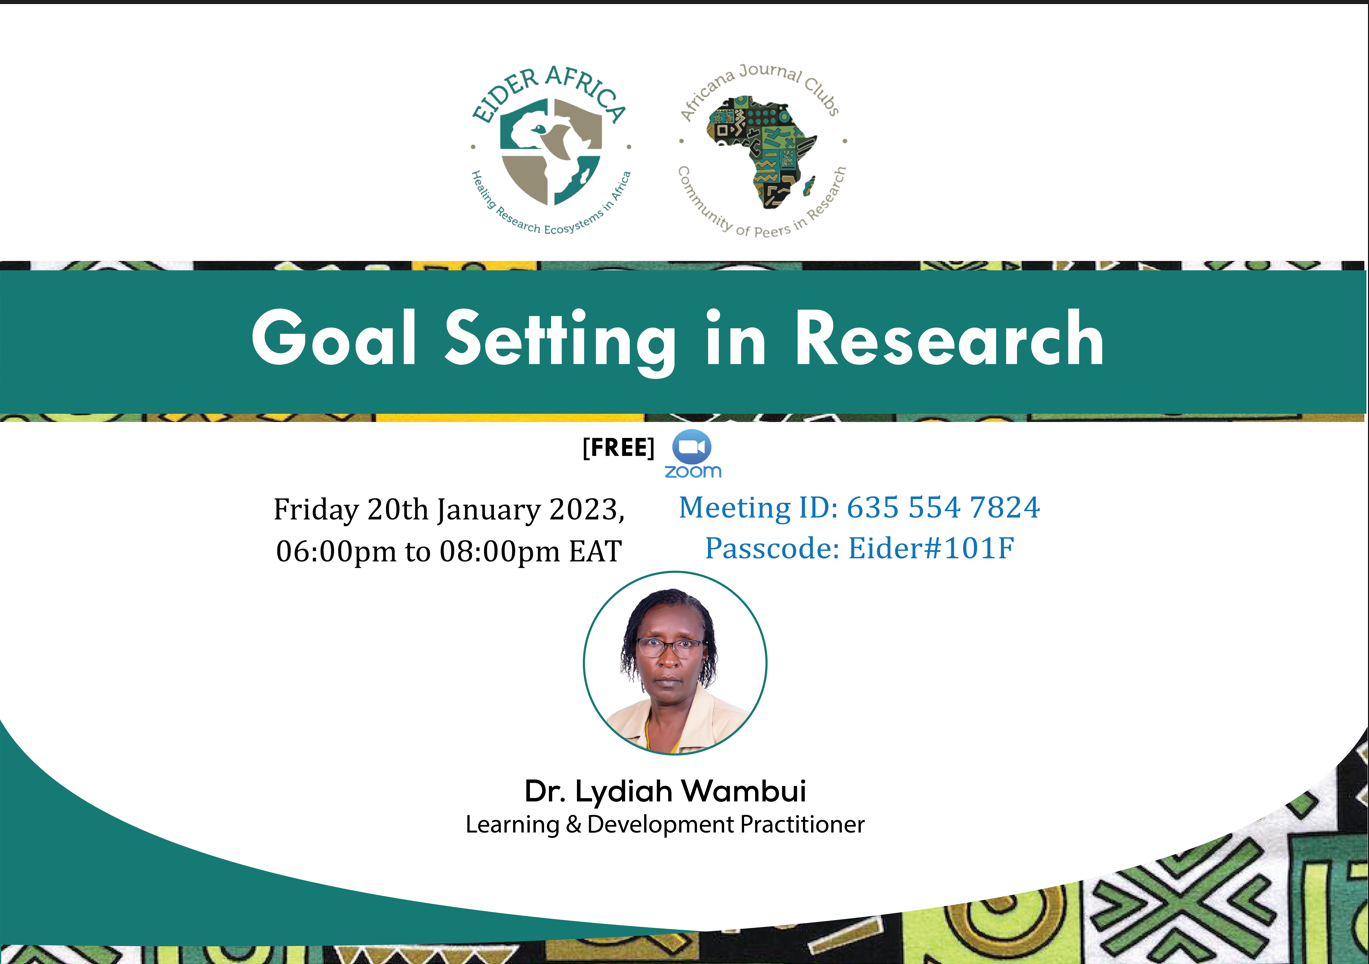 Goal Setting in Research by Dr. Lydiah Wambui